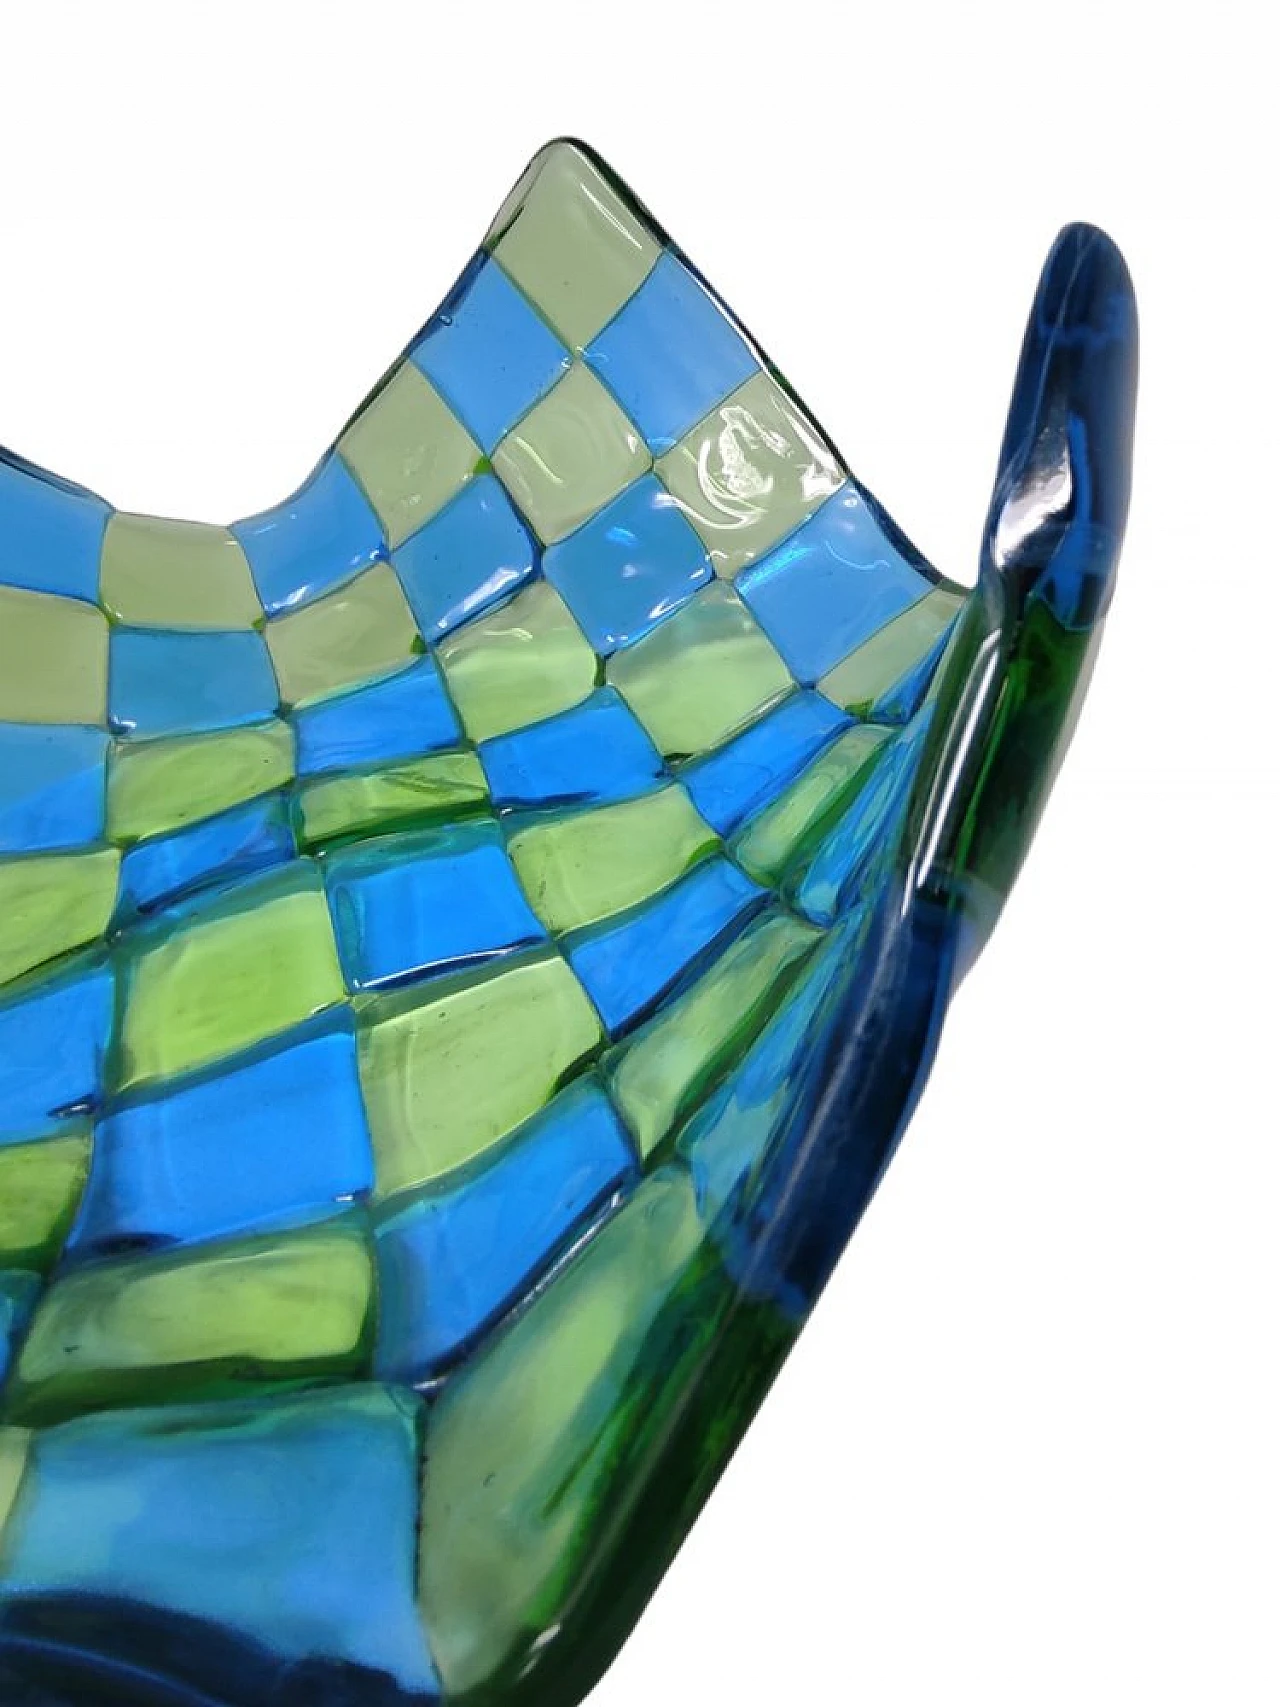 Checkered emptying tray in Murano glass by Barovier and Donà, 1990s 8